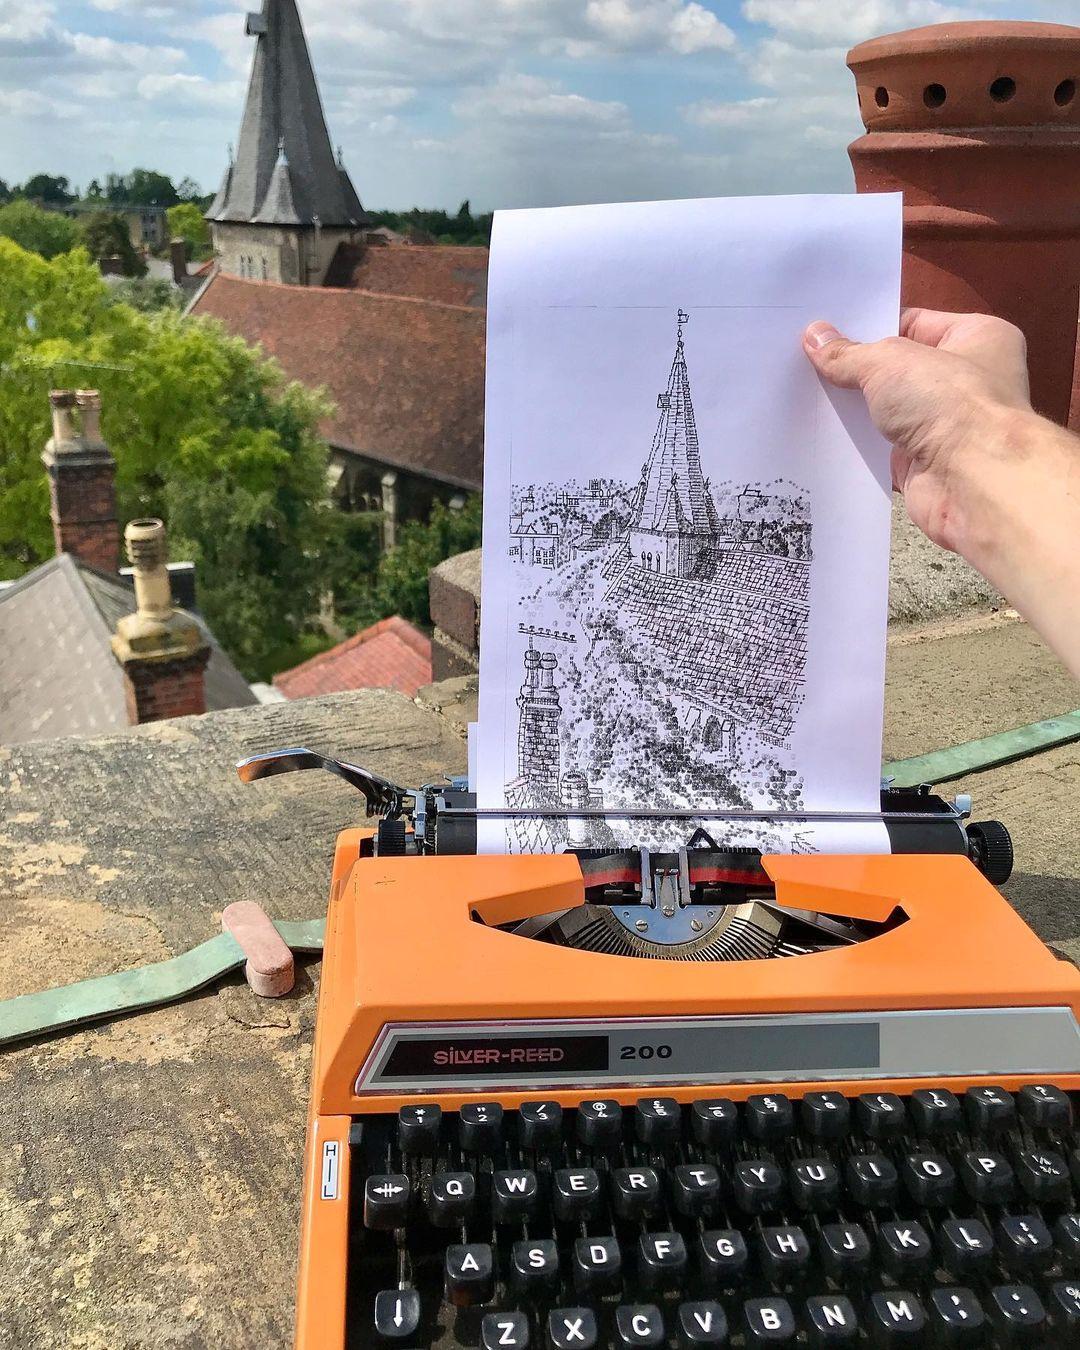 A section of the drawing typed on-location from the rooftop of the Moot Hall, in Maldon city, Essex. (Courtesy of <a href="https://www.instagram.com/jamescookartwork/">James Cook Artwork</a>)